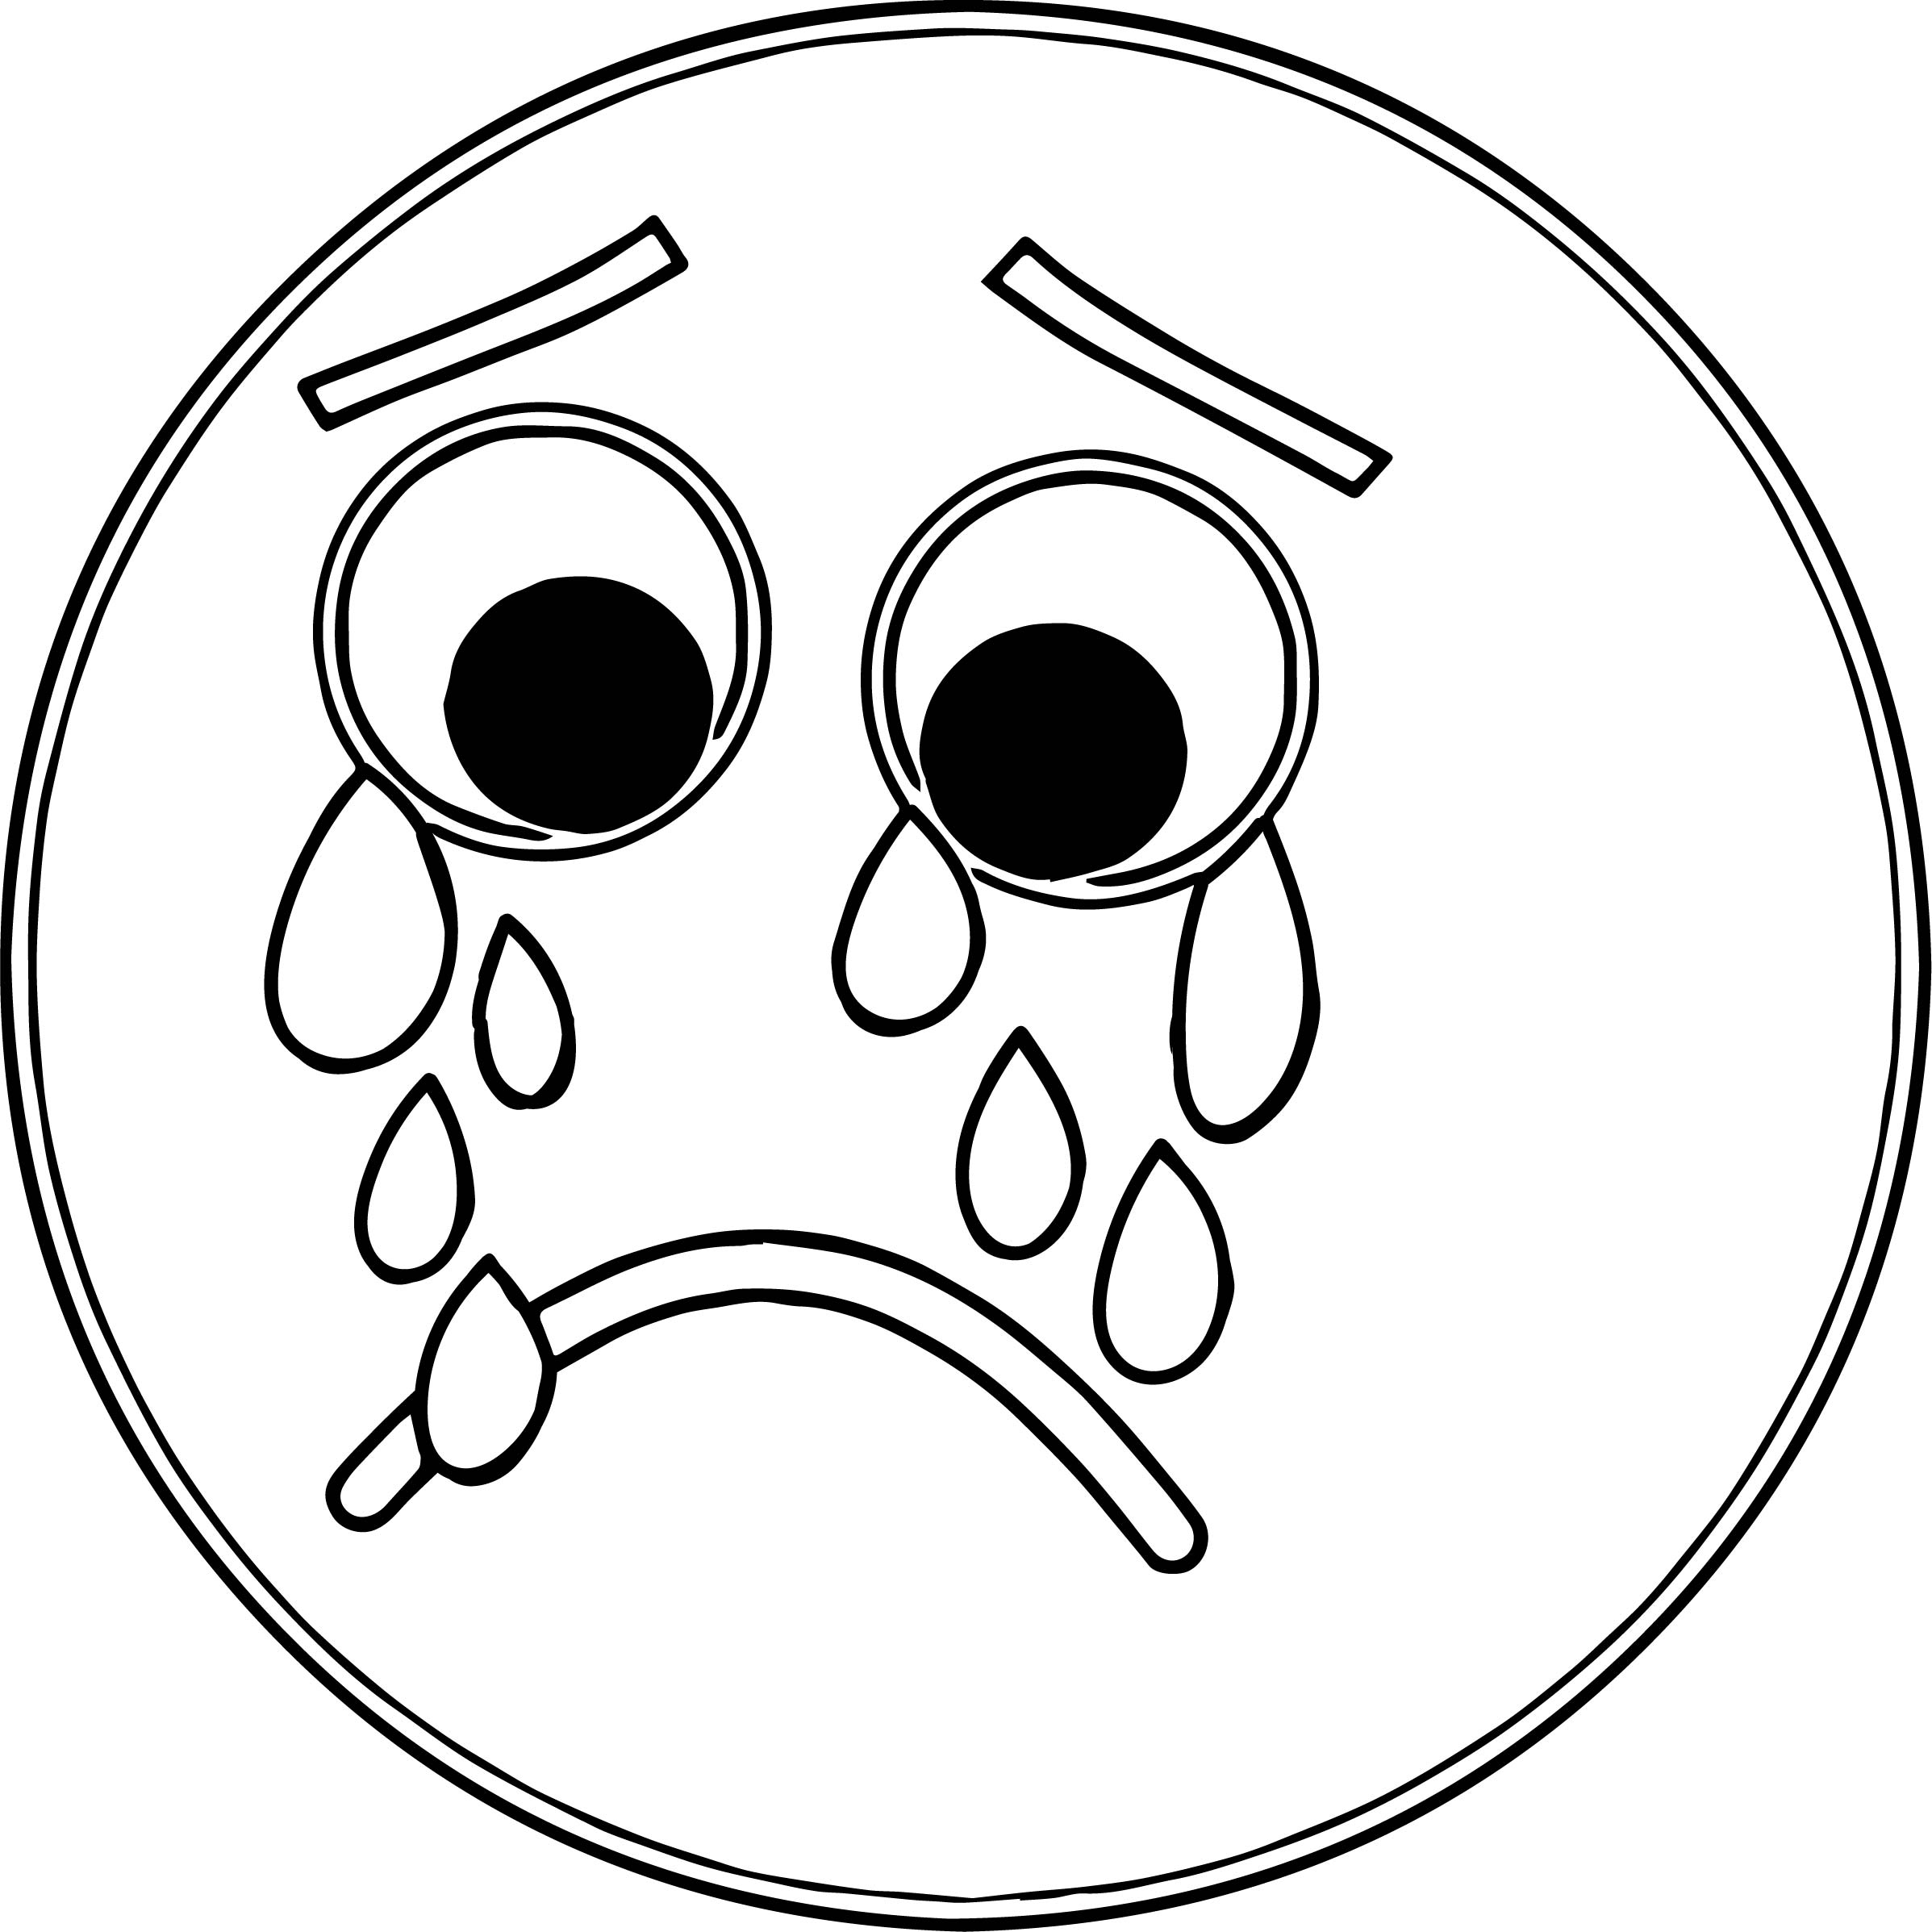 2395x2395 Printable Sad Face Coloring Page Free Coloring Pages Download.